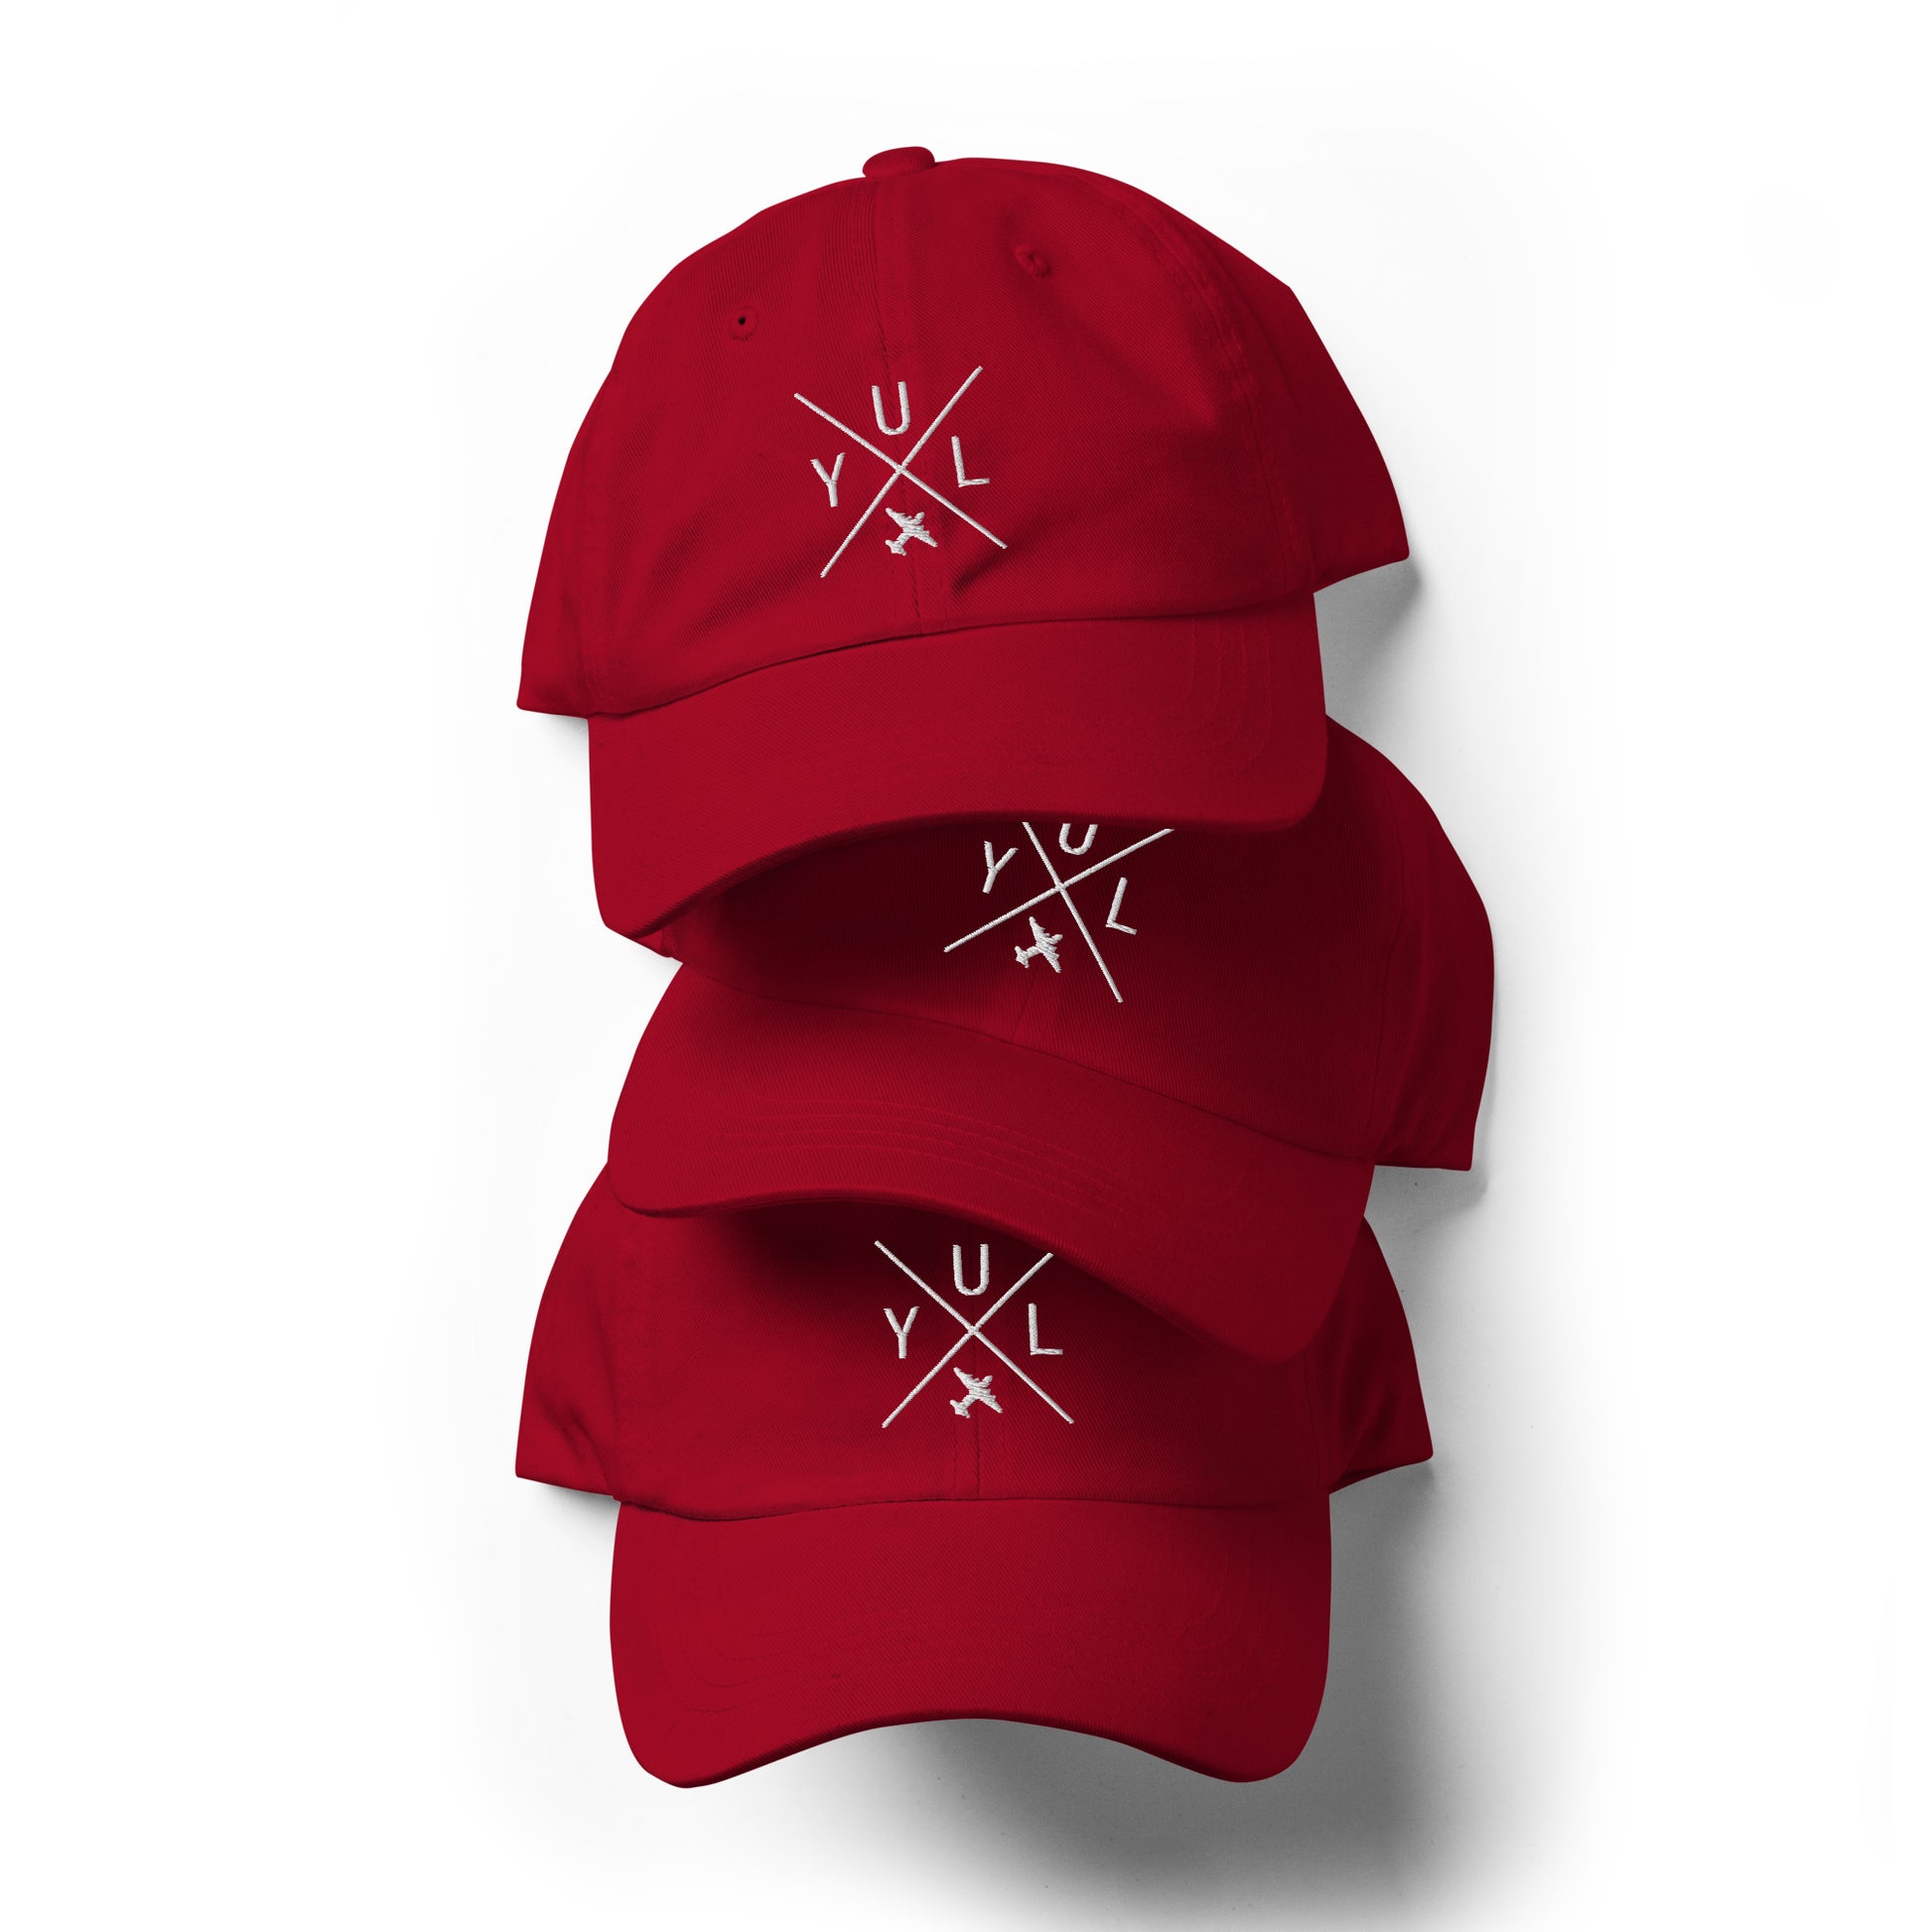 Crossed-X Dad Hat - White • YUL Montreal • YHM Designs - Image 03